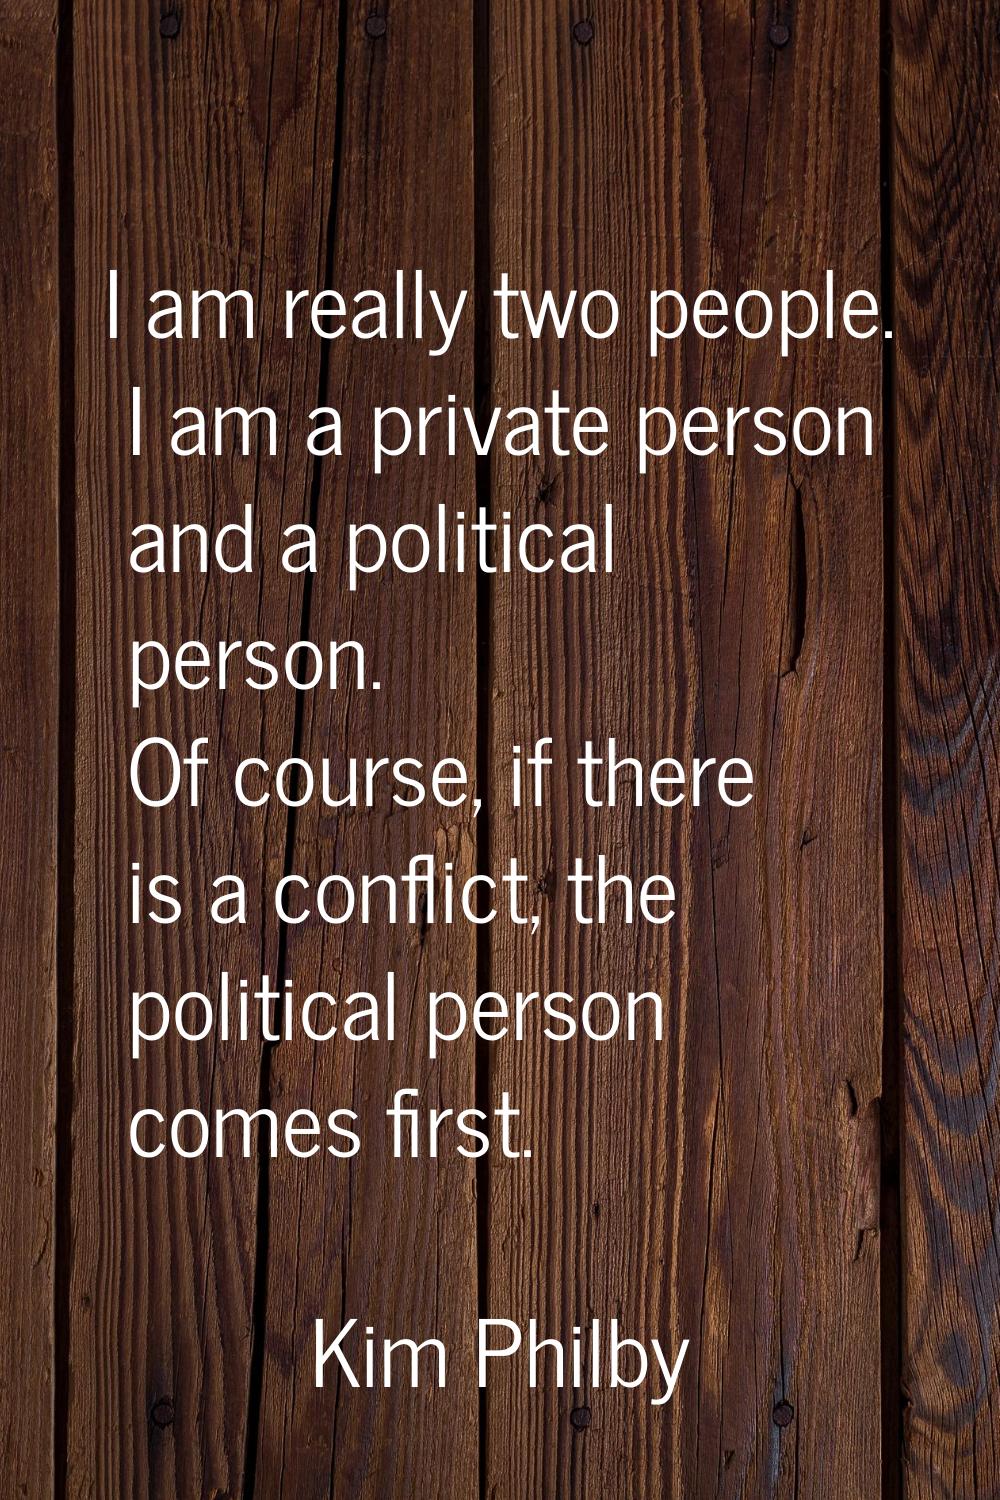 I am really two people. I am a private person and a political person. Of course, if there is a conf